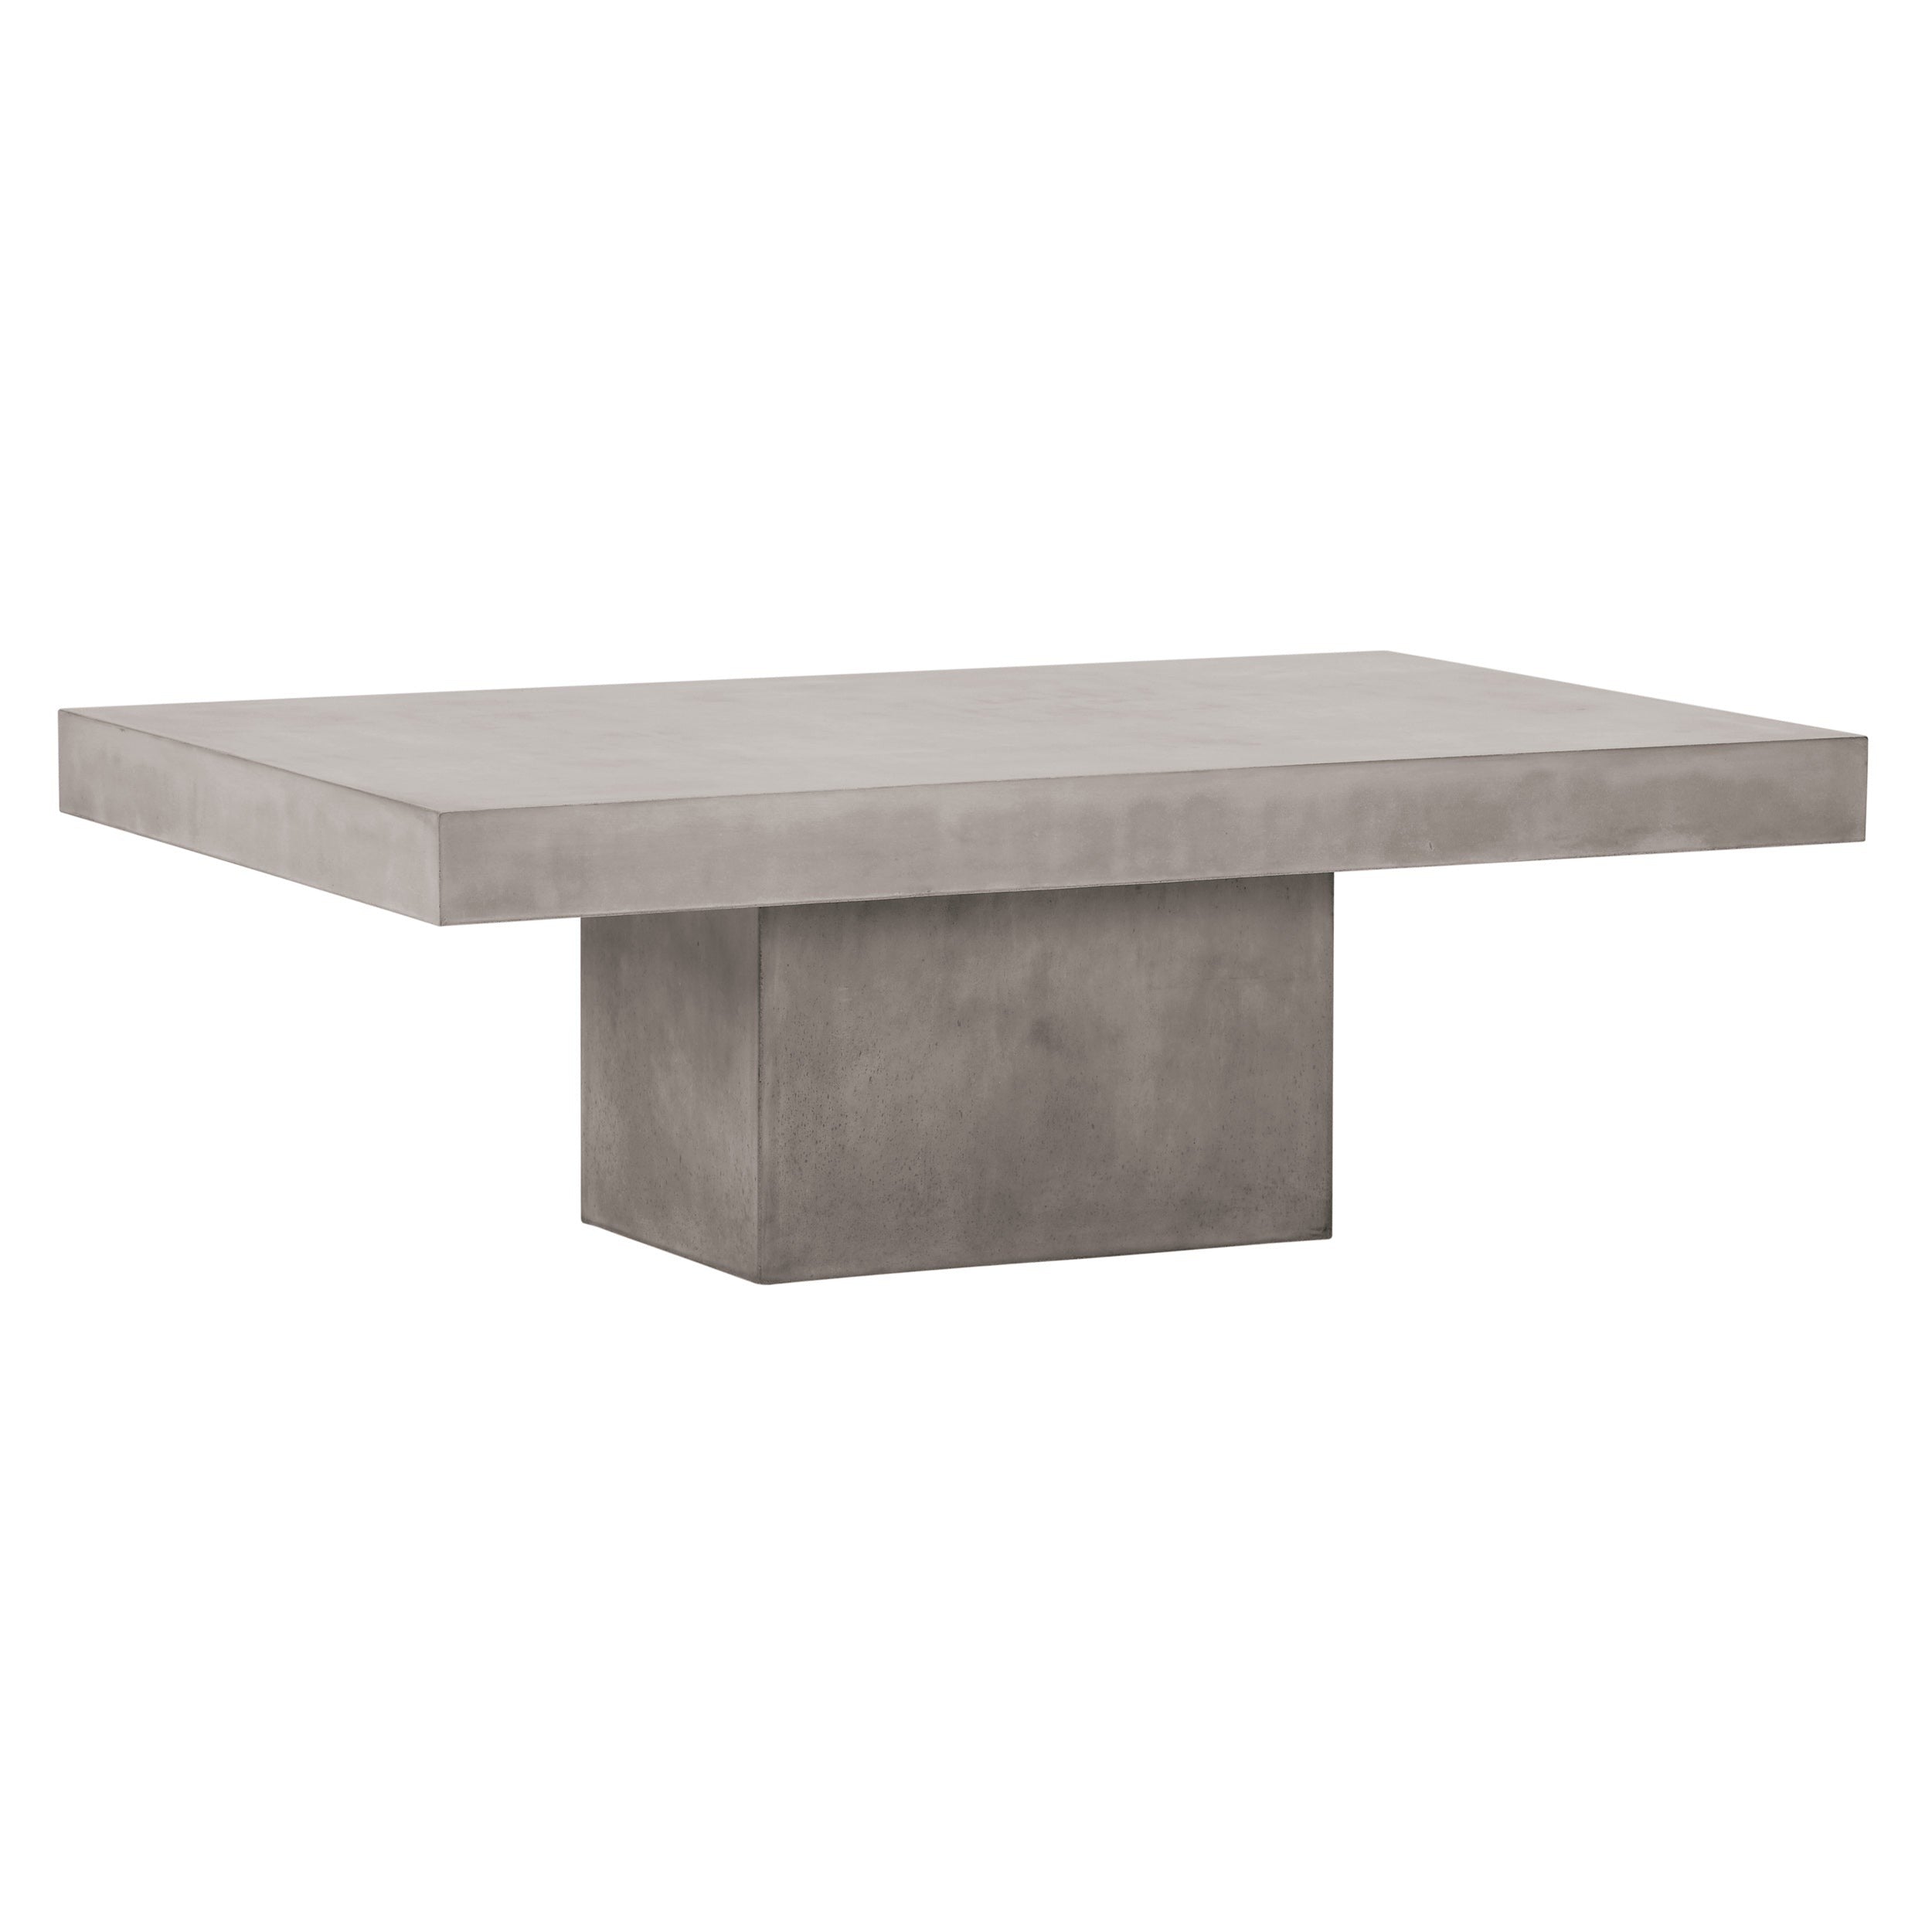 Terrace Concrete Coffee Table - Slate Gray Outdoor Coffee Table